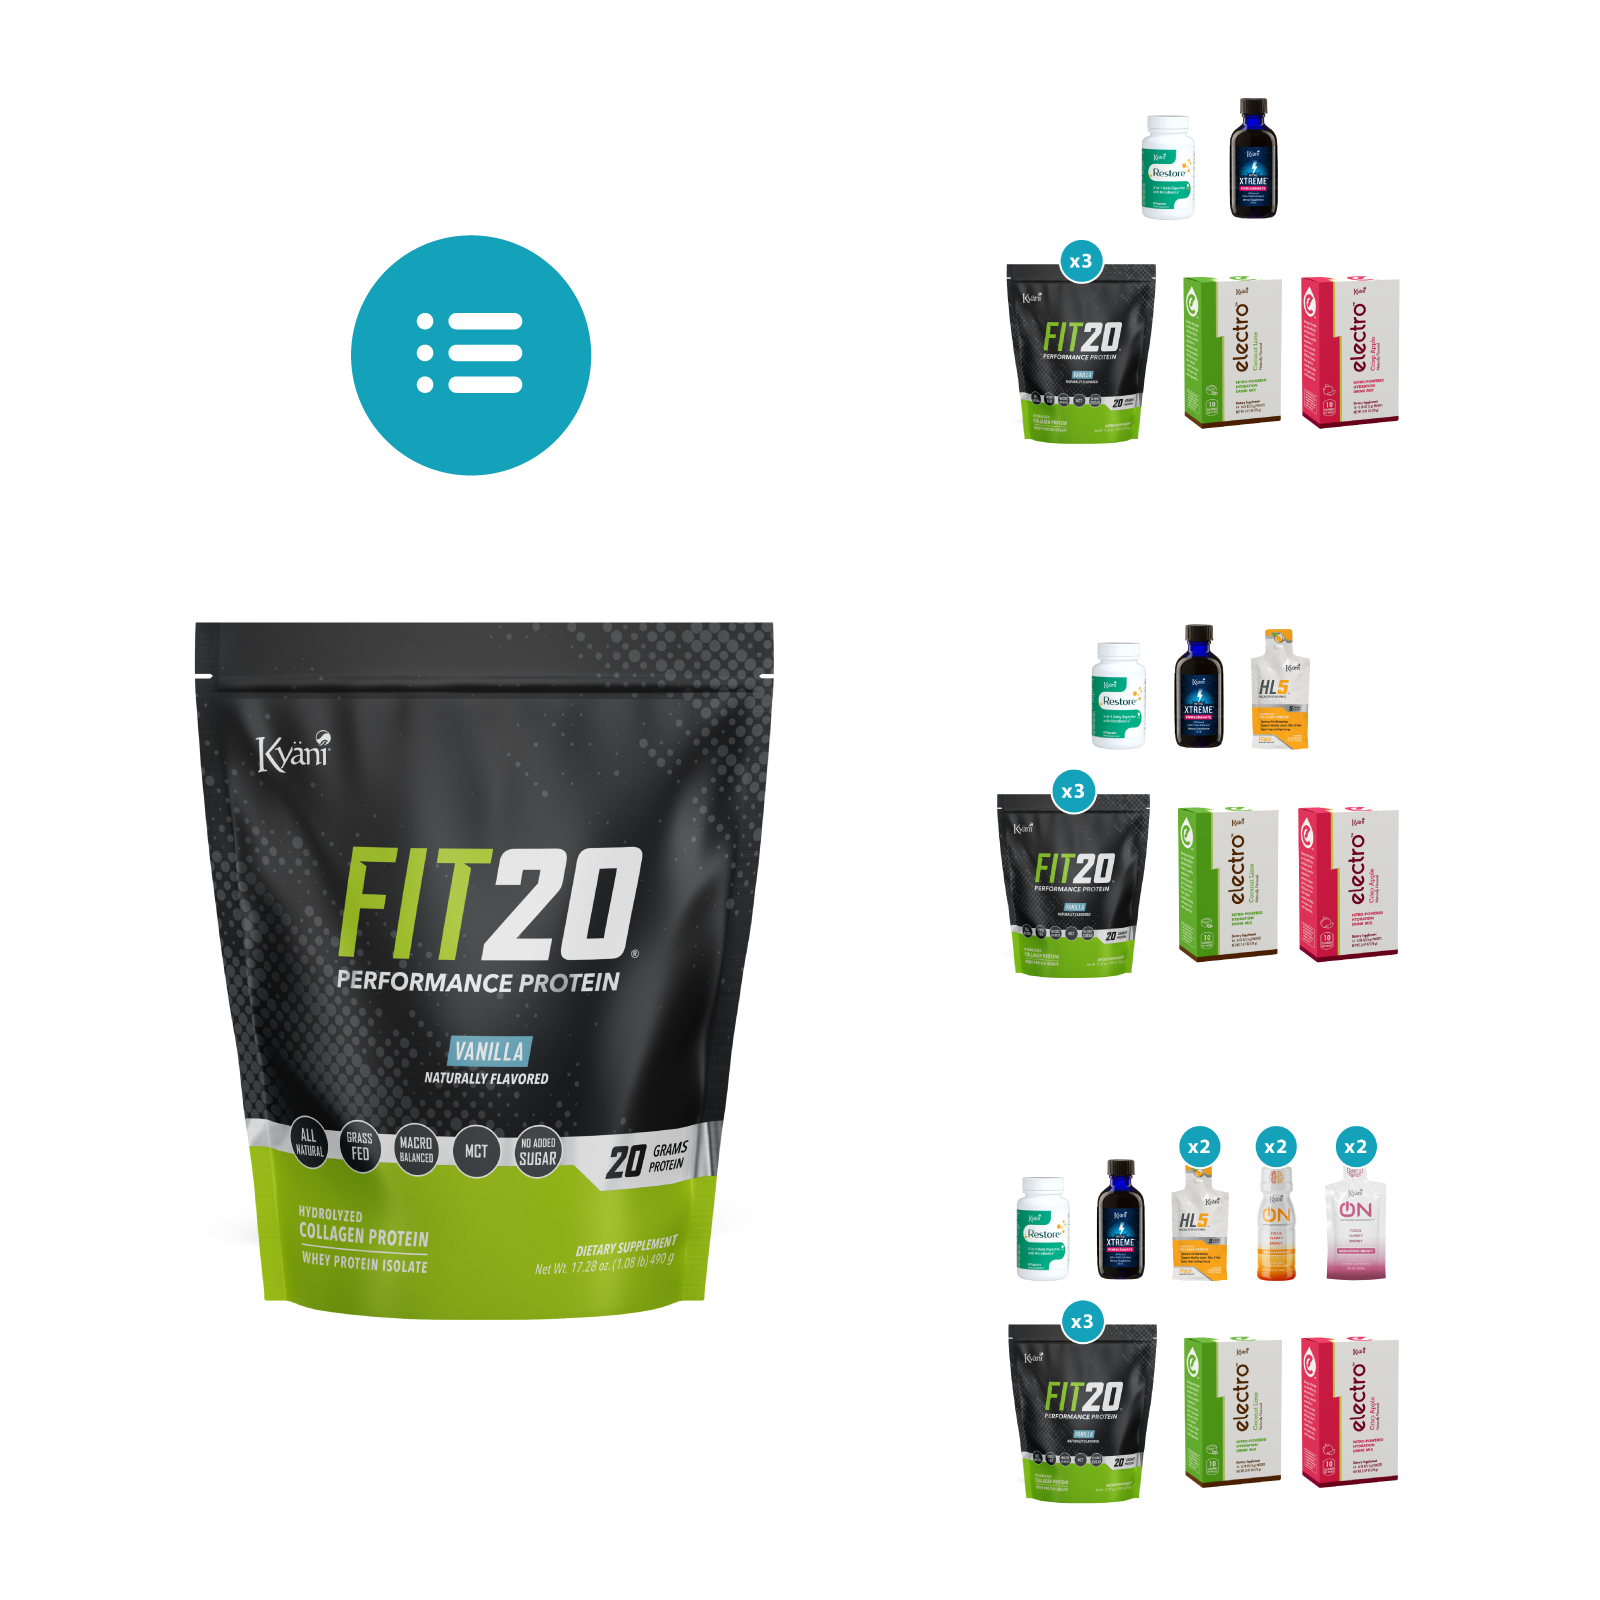 Nitro Nutrition Bundles with FIT20